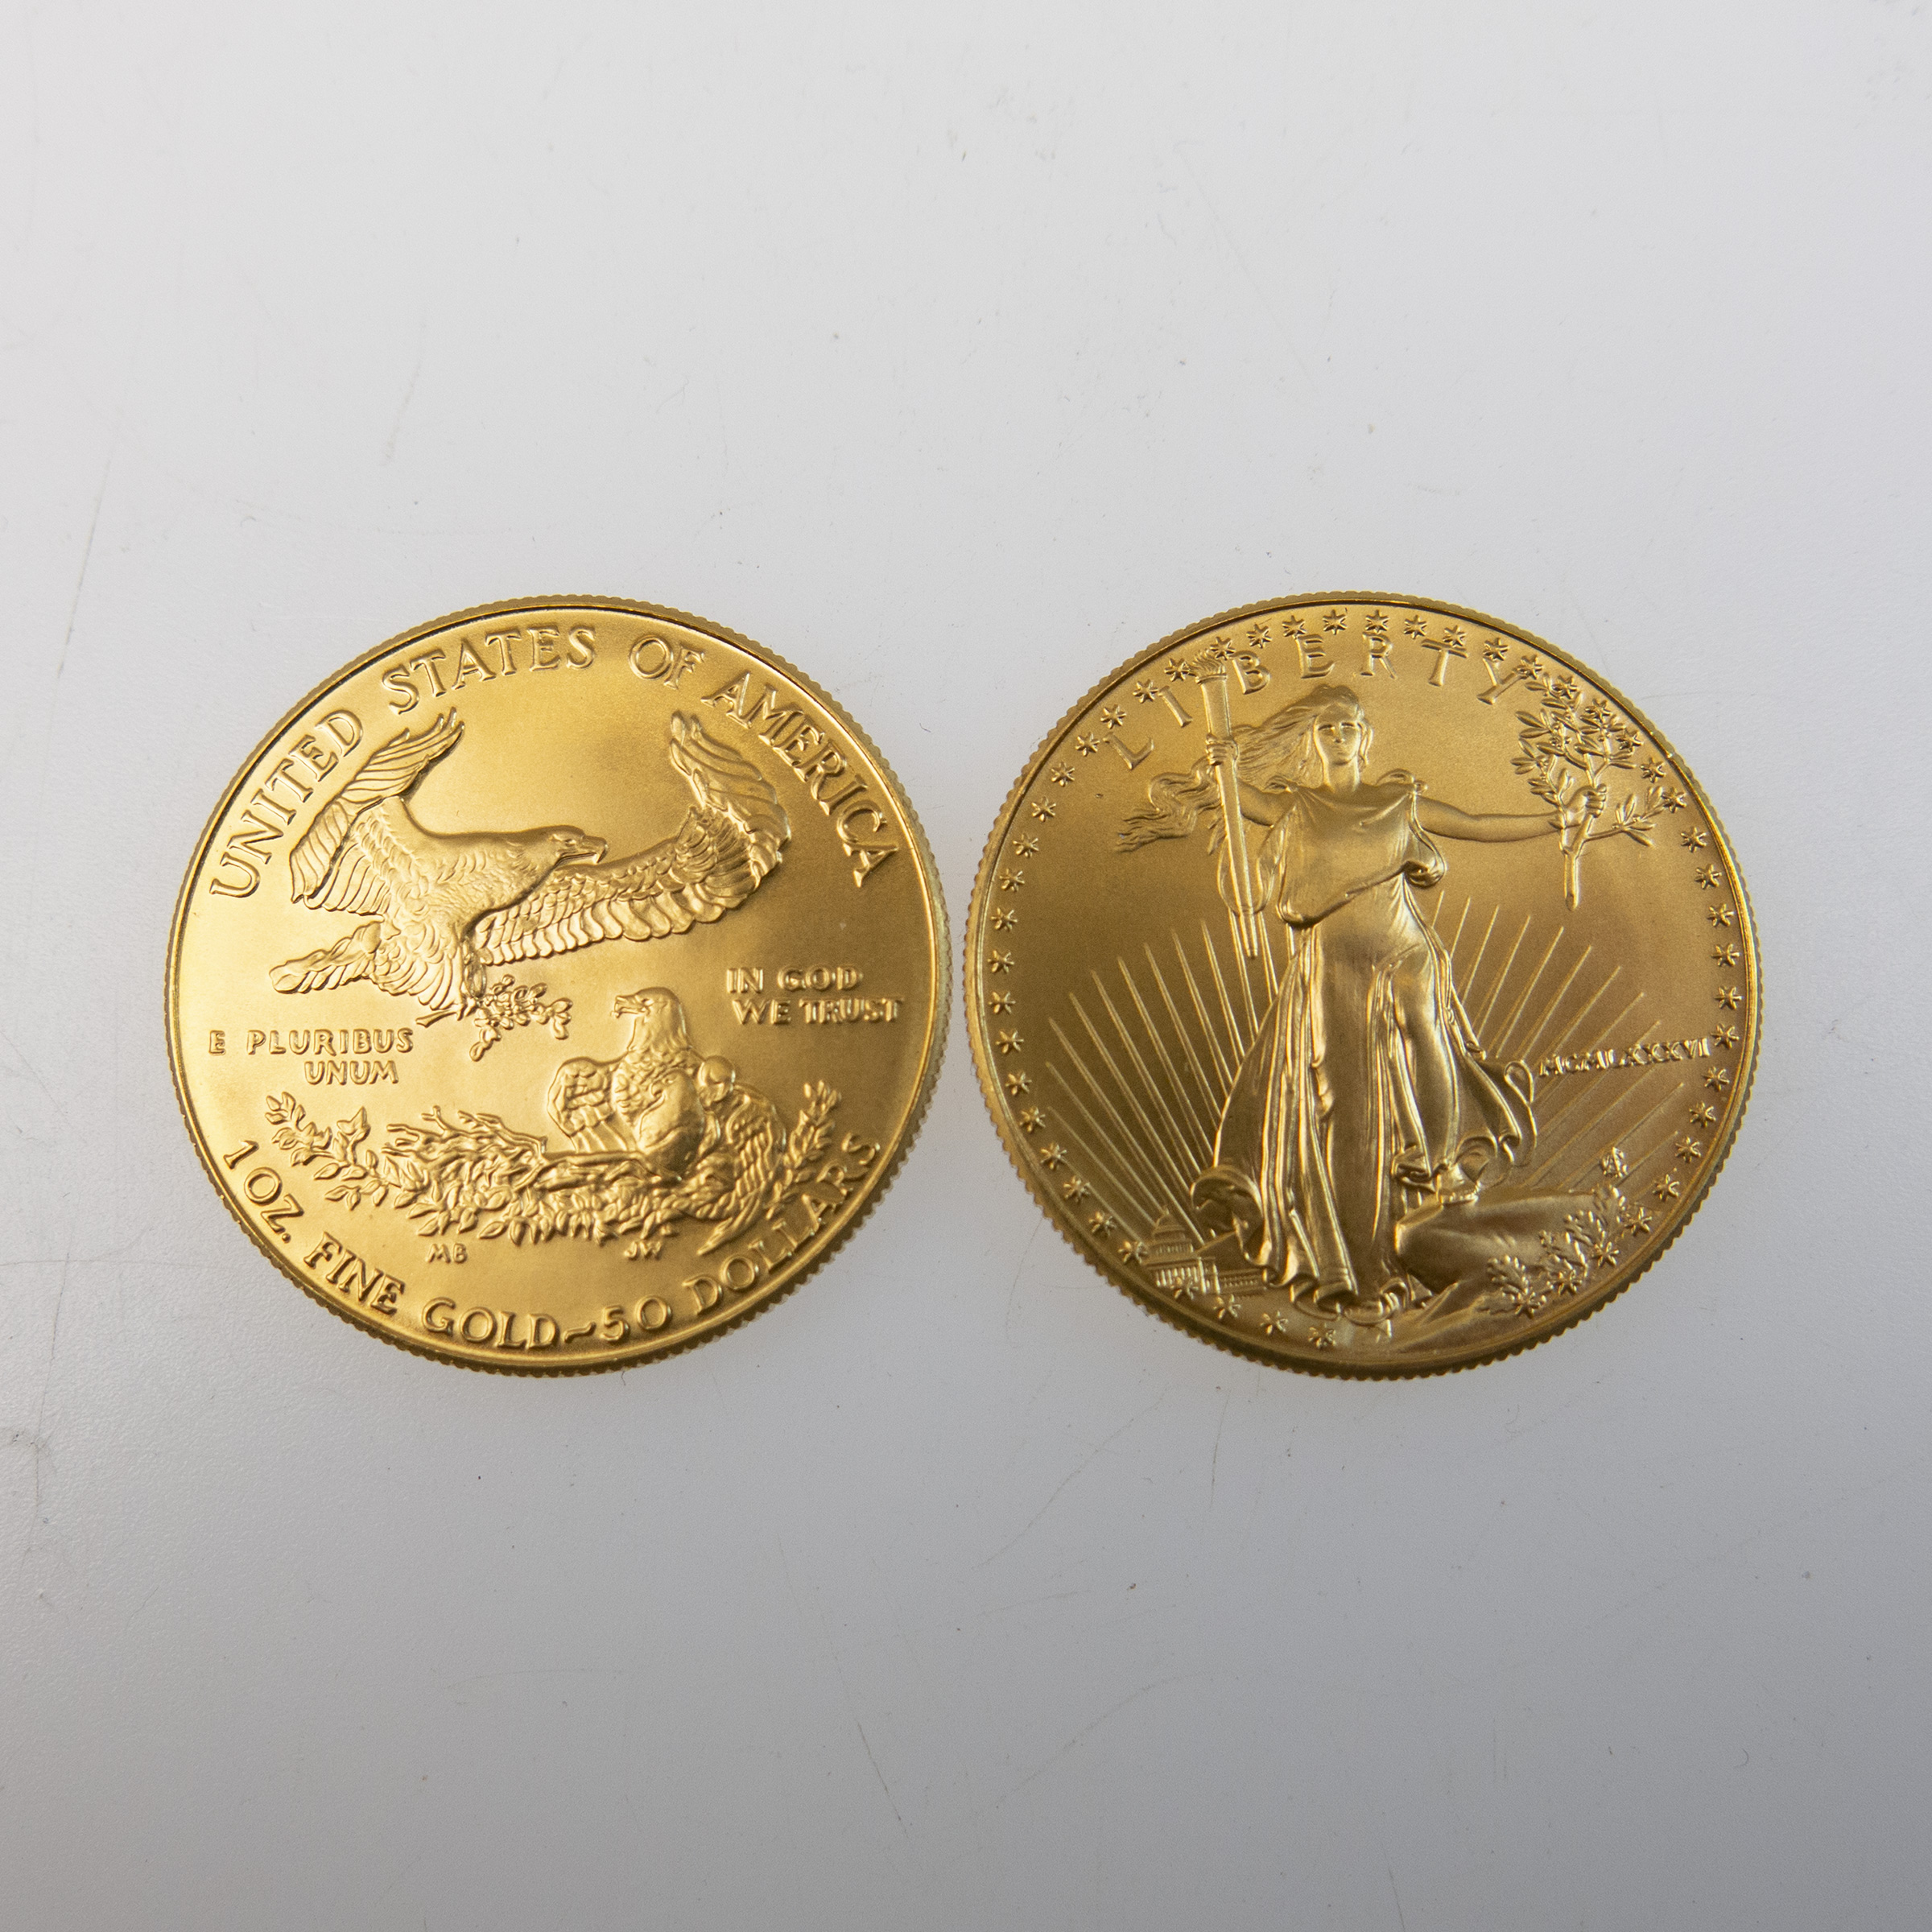 Two American $50 One Ounce Gold Coins